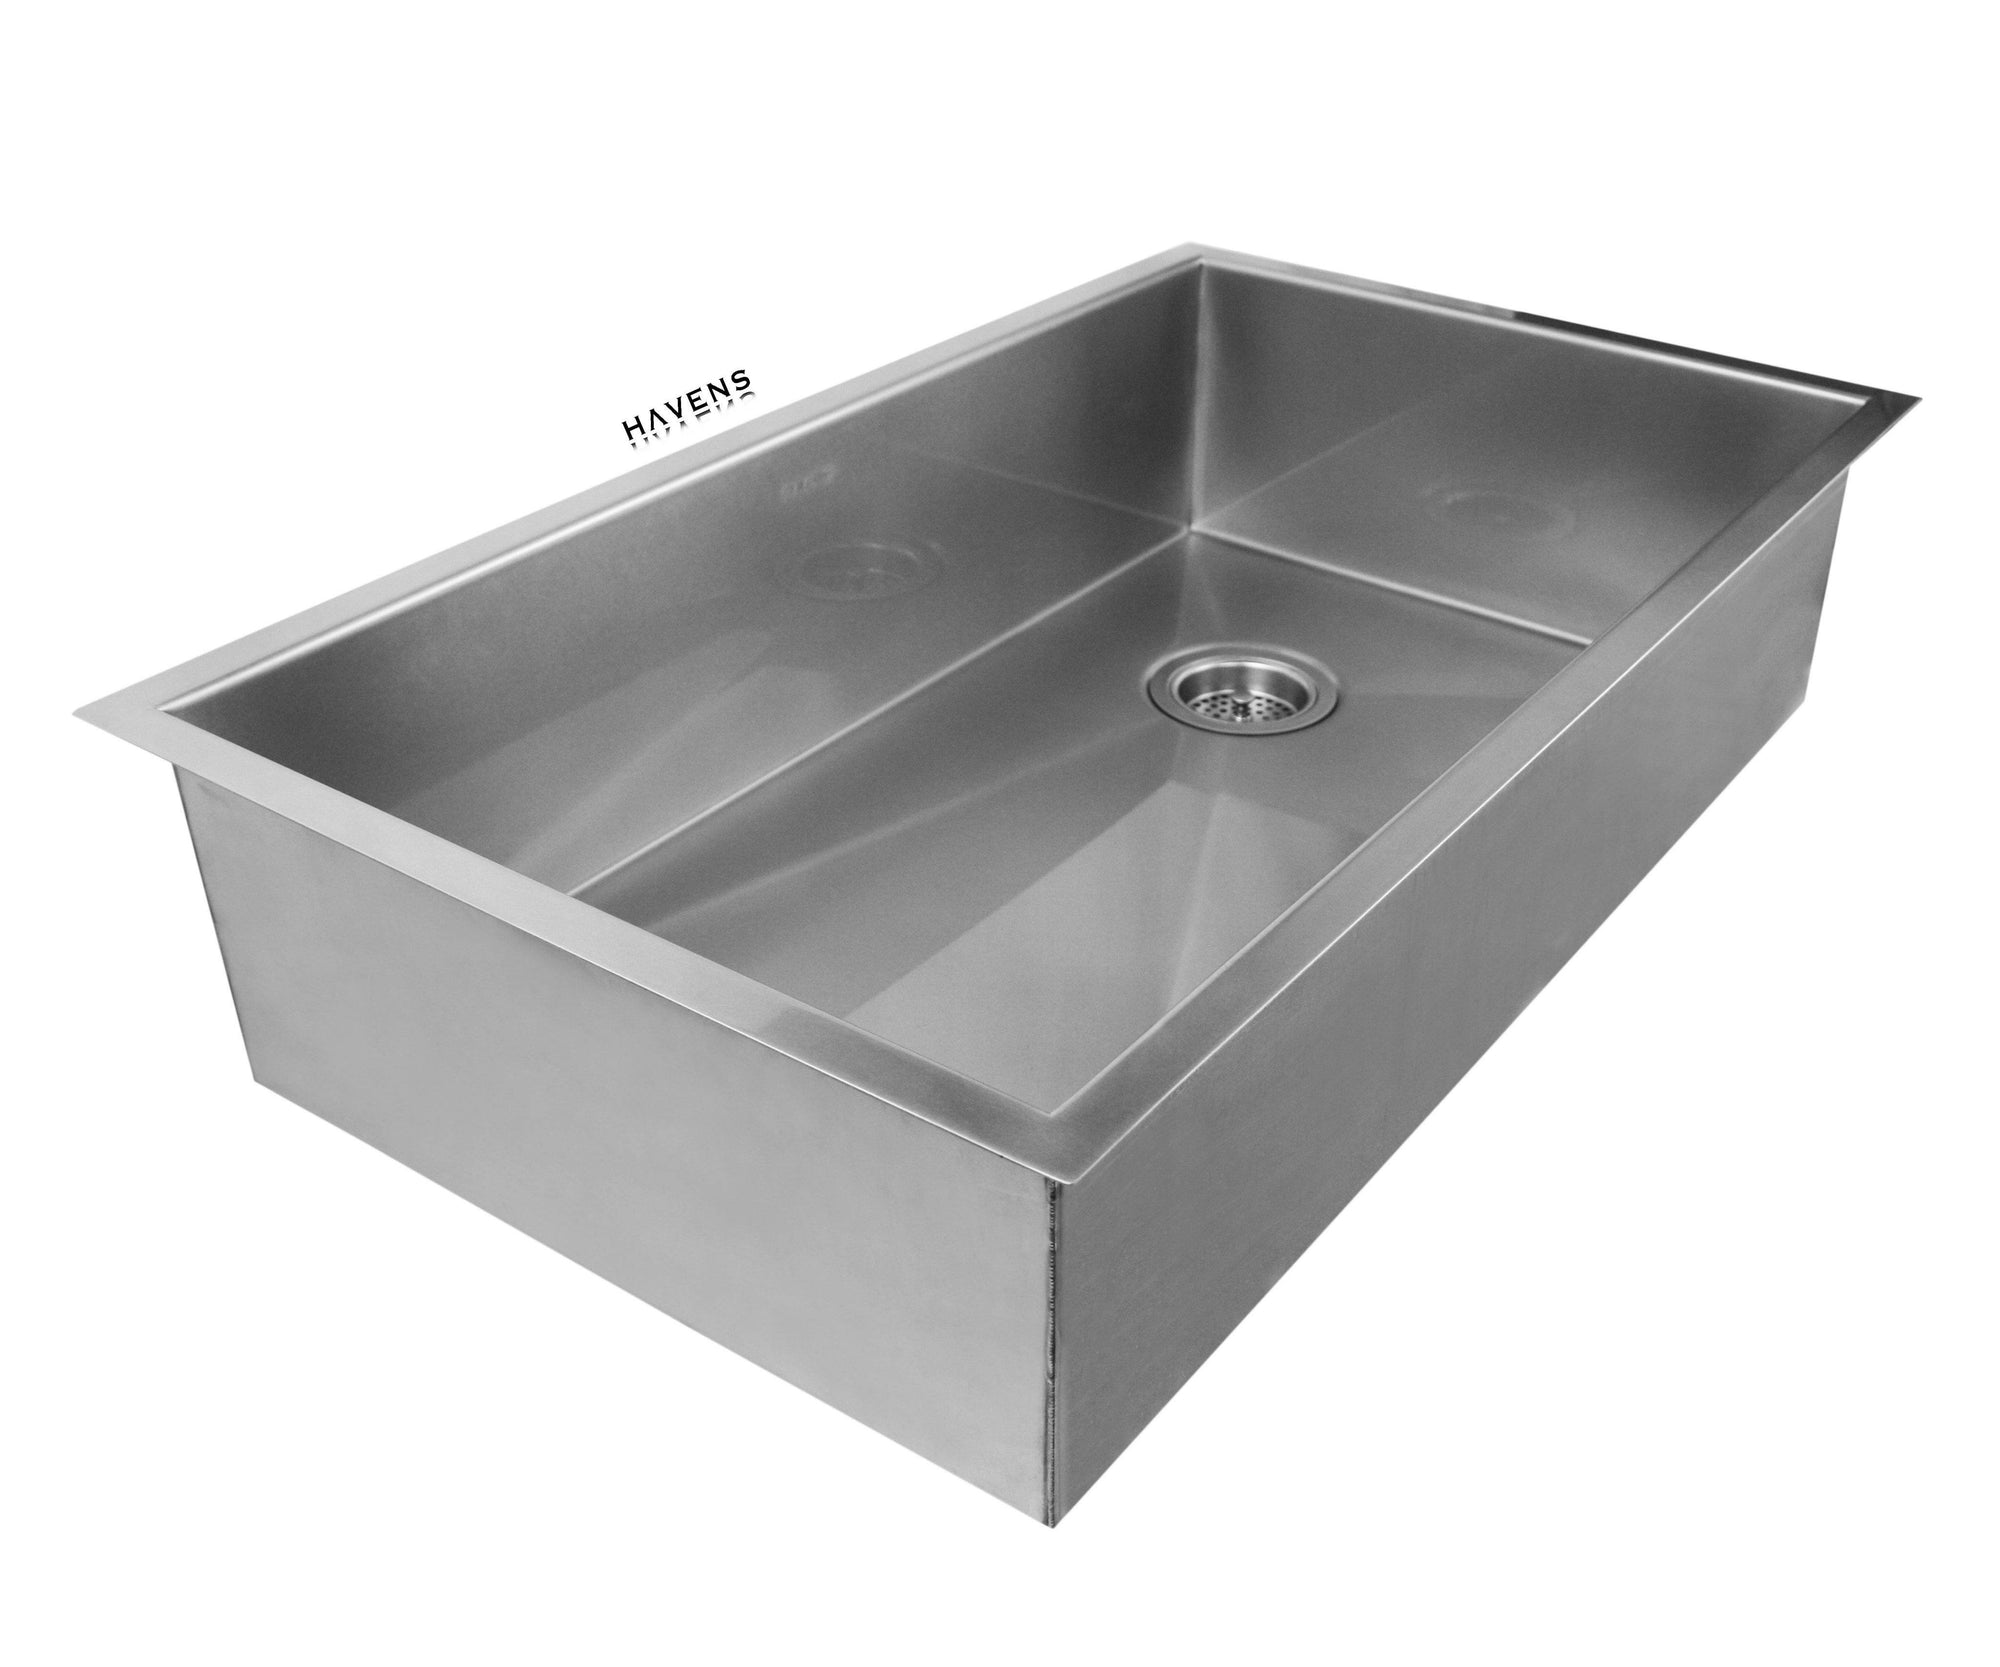 Undermount stainless steel sink made in the USA.